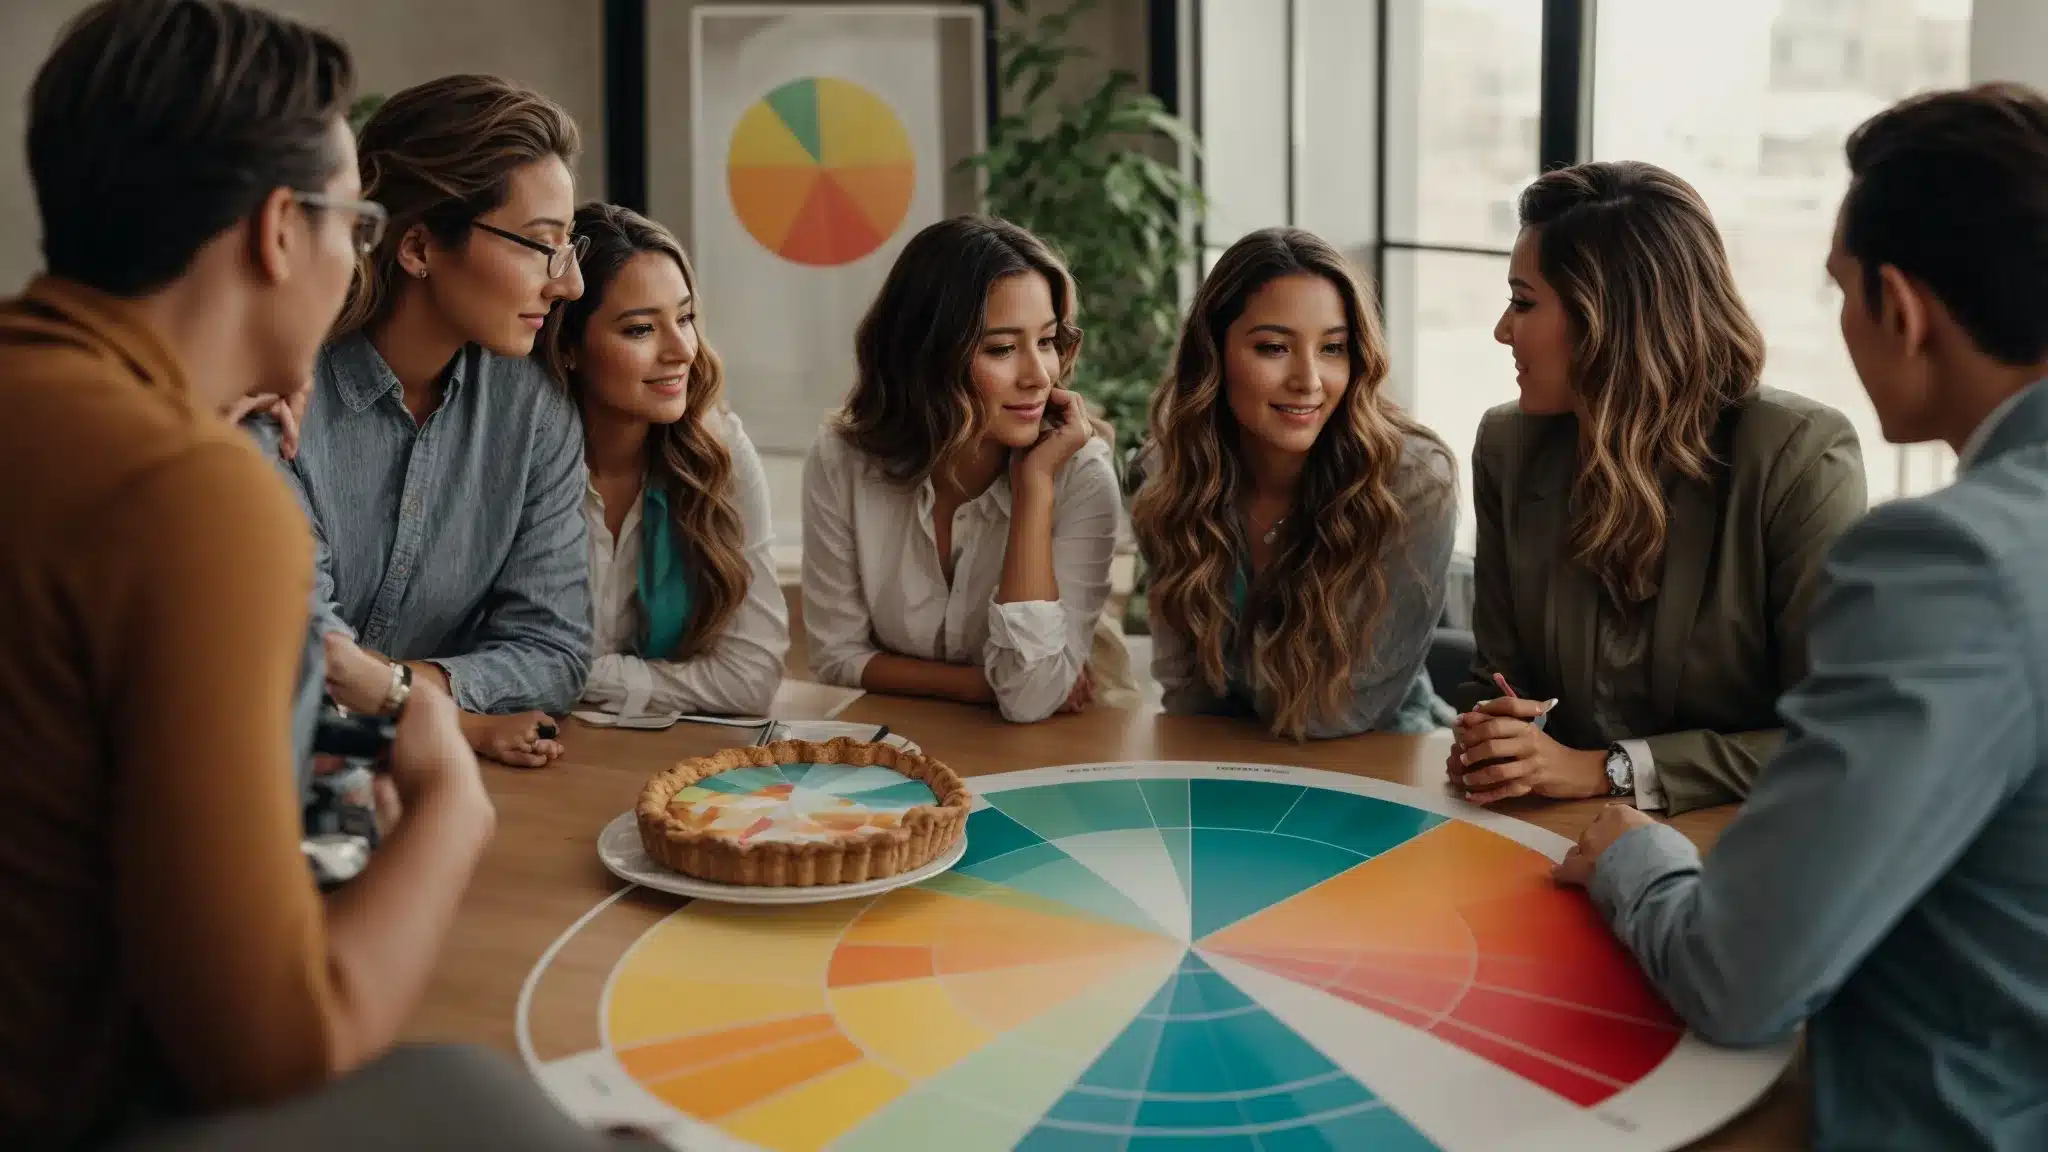 A Group Of Marketers Discussing Over A Colorful Pie Chart And A World Map During A Strategy Meeting.